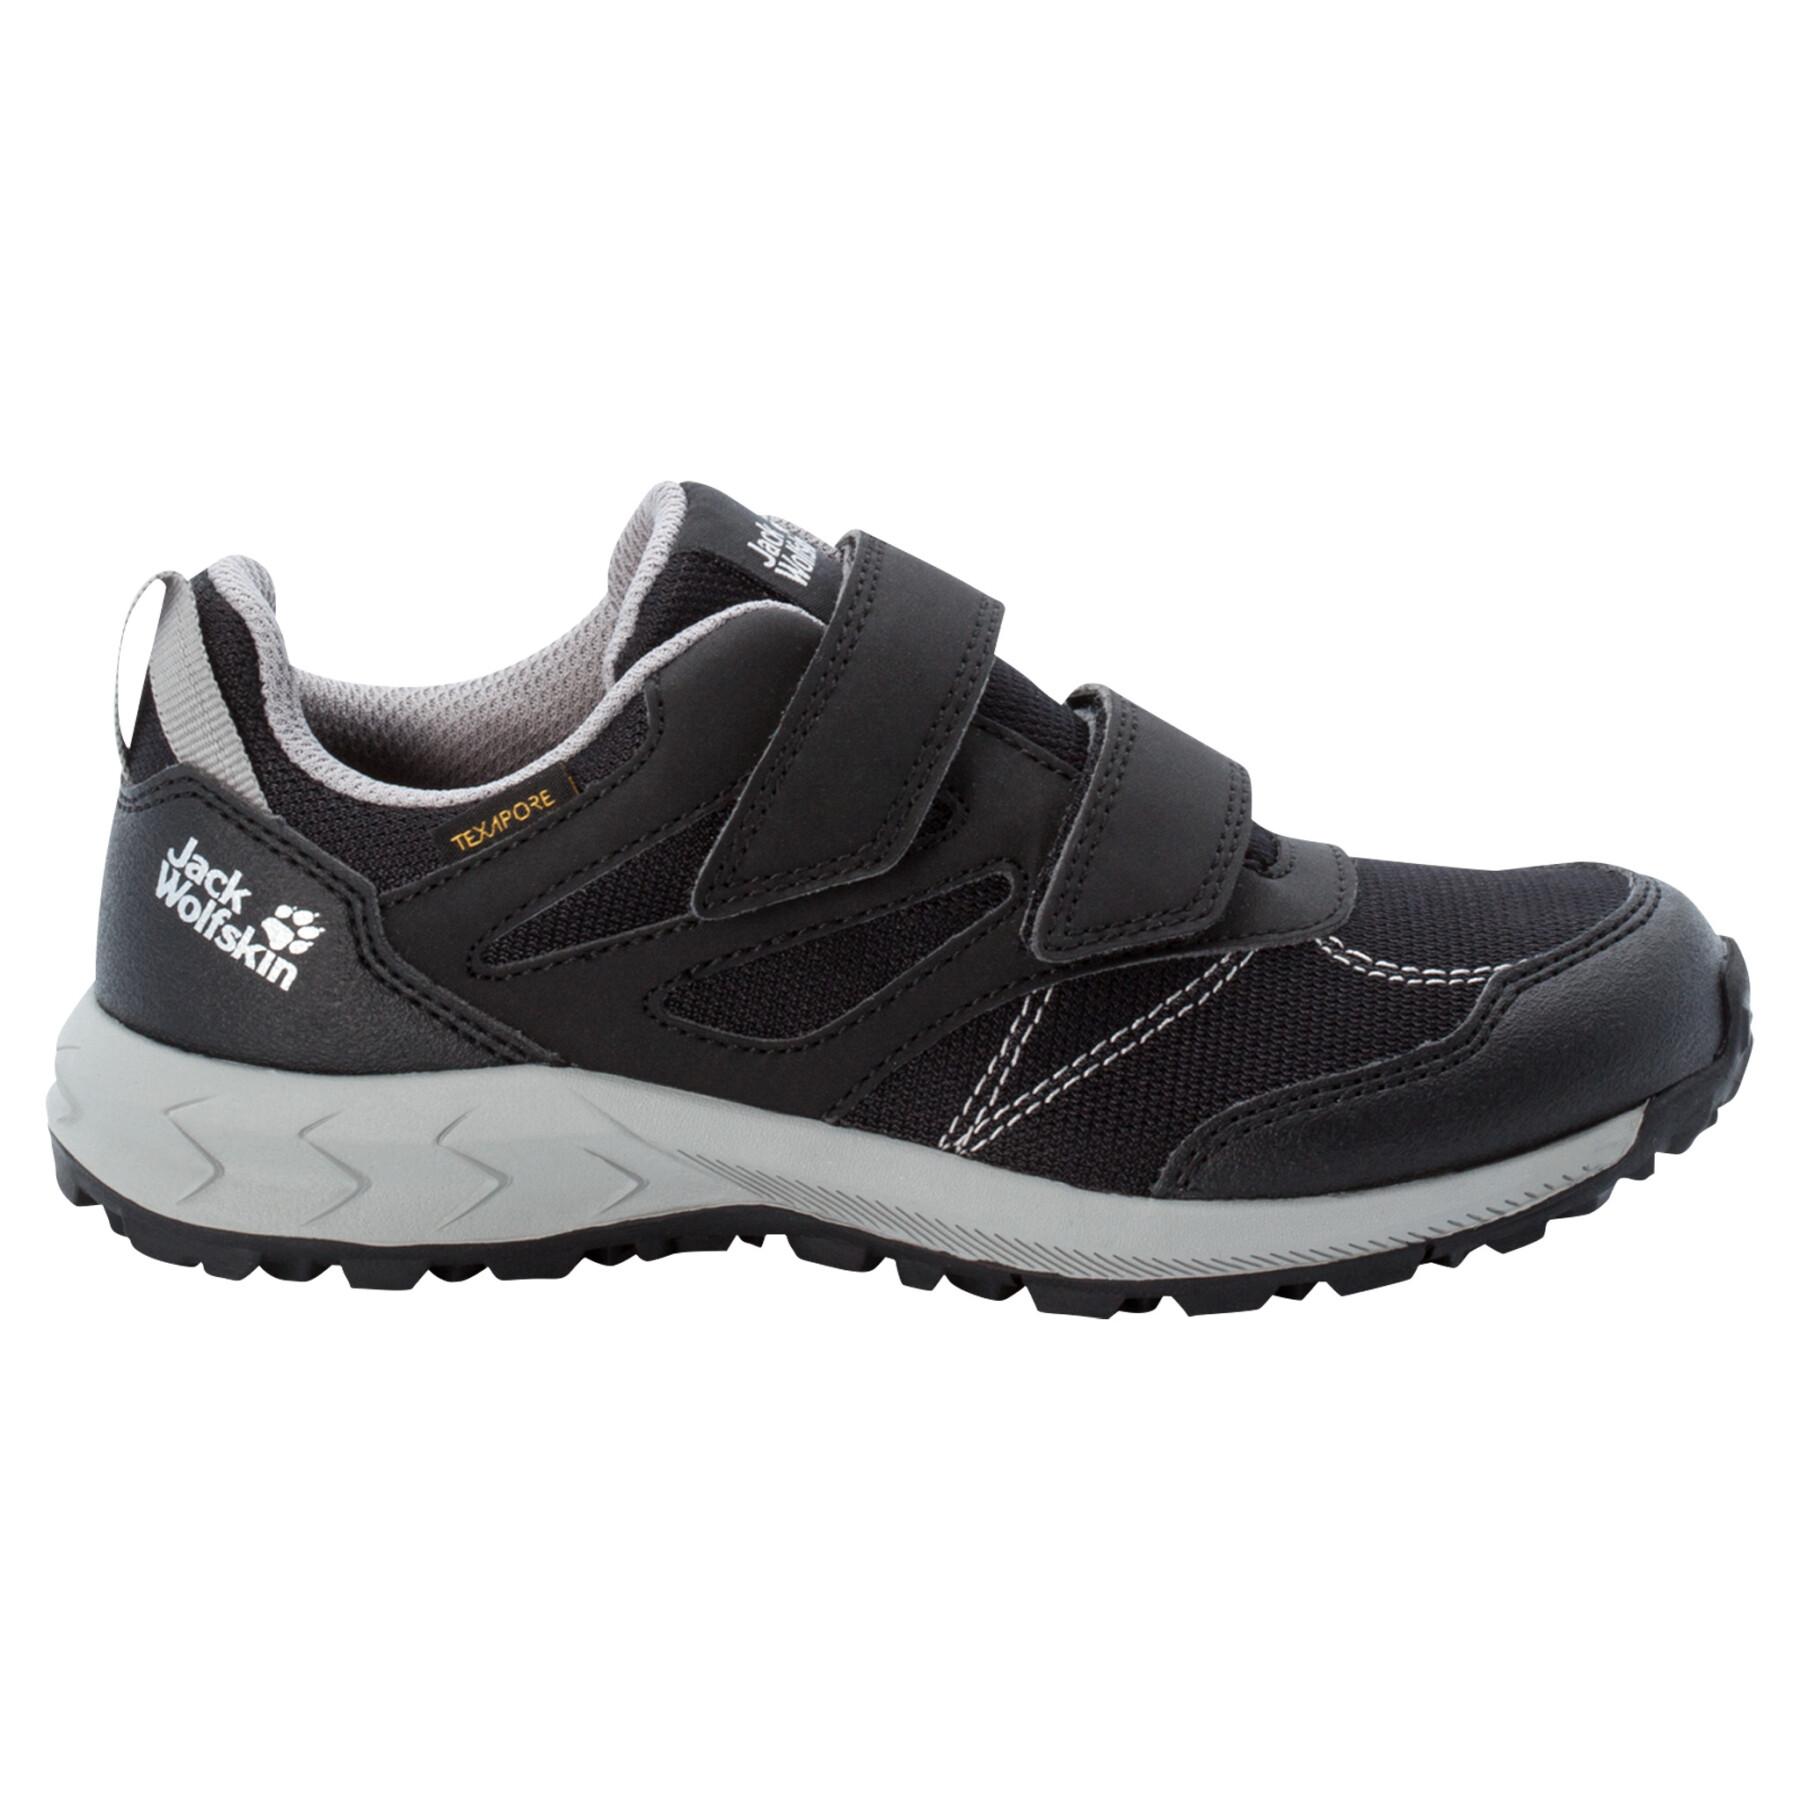 Children's hiking shoes Jack Wolfskin Woodland Texapore Vc